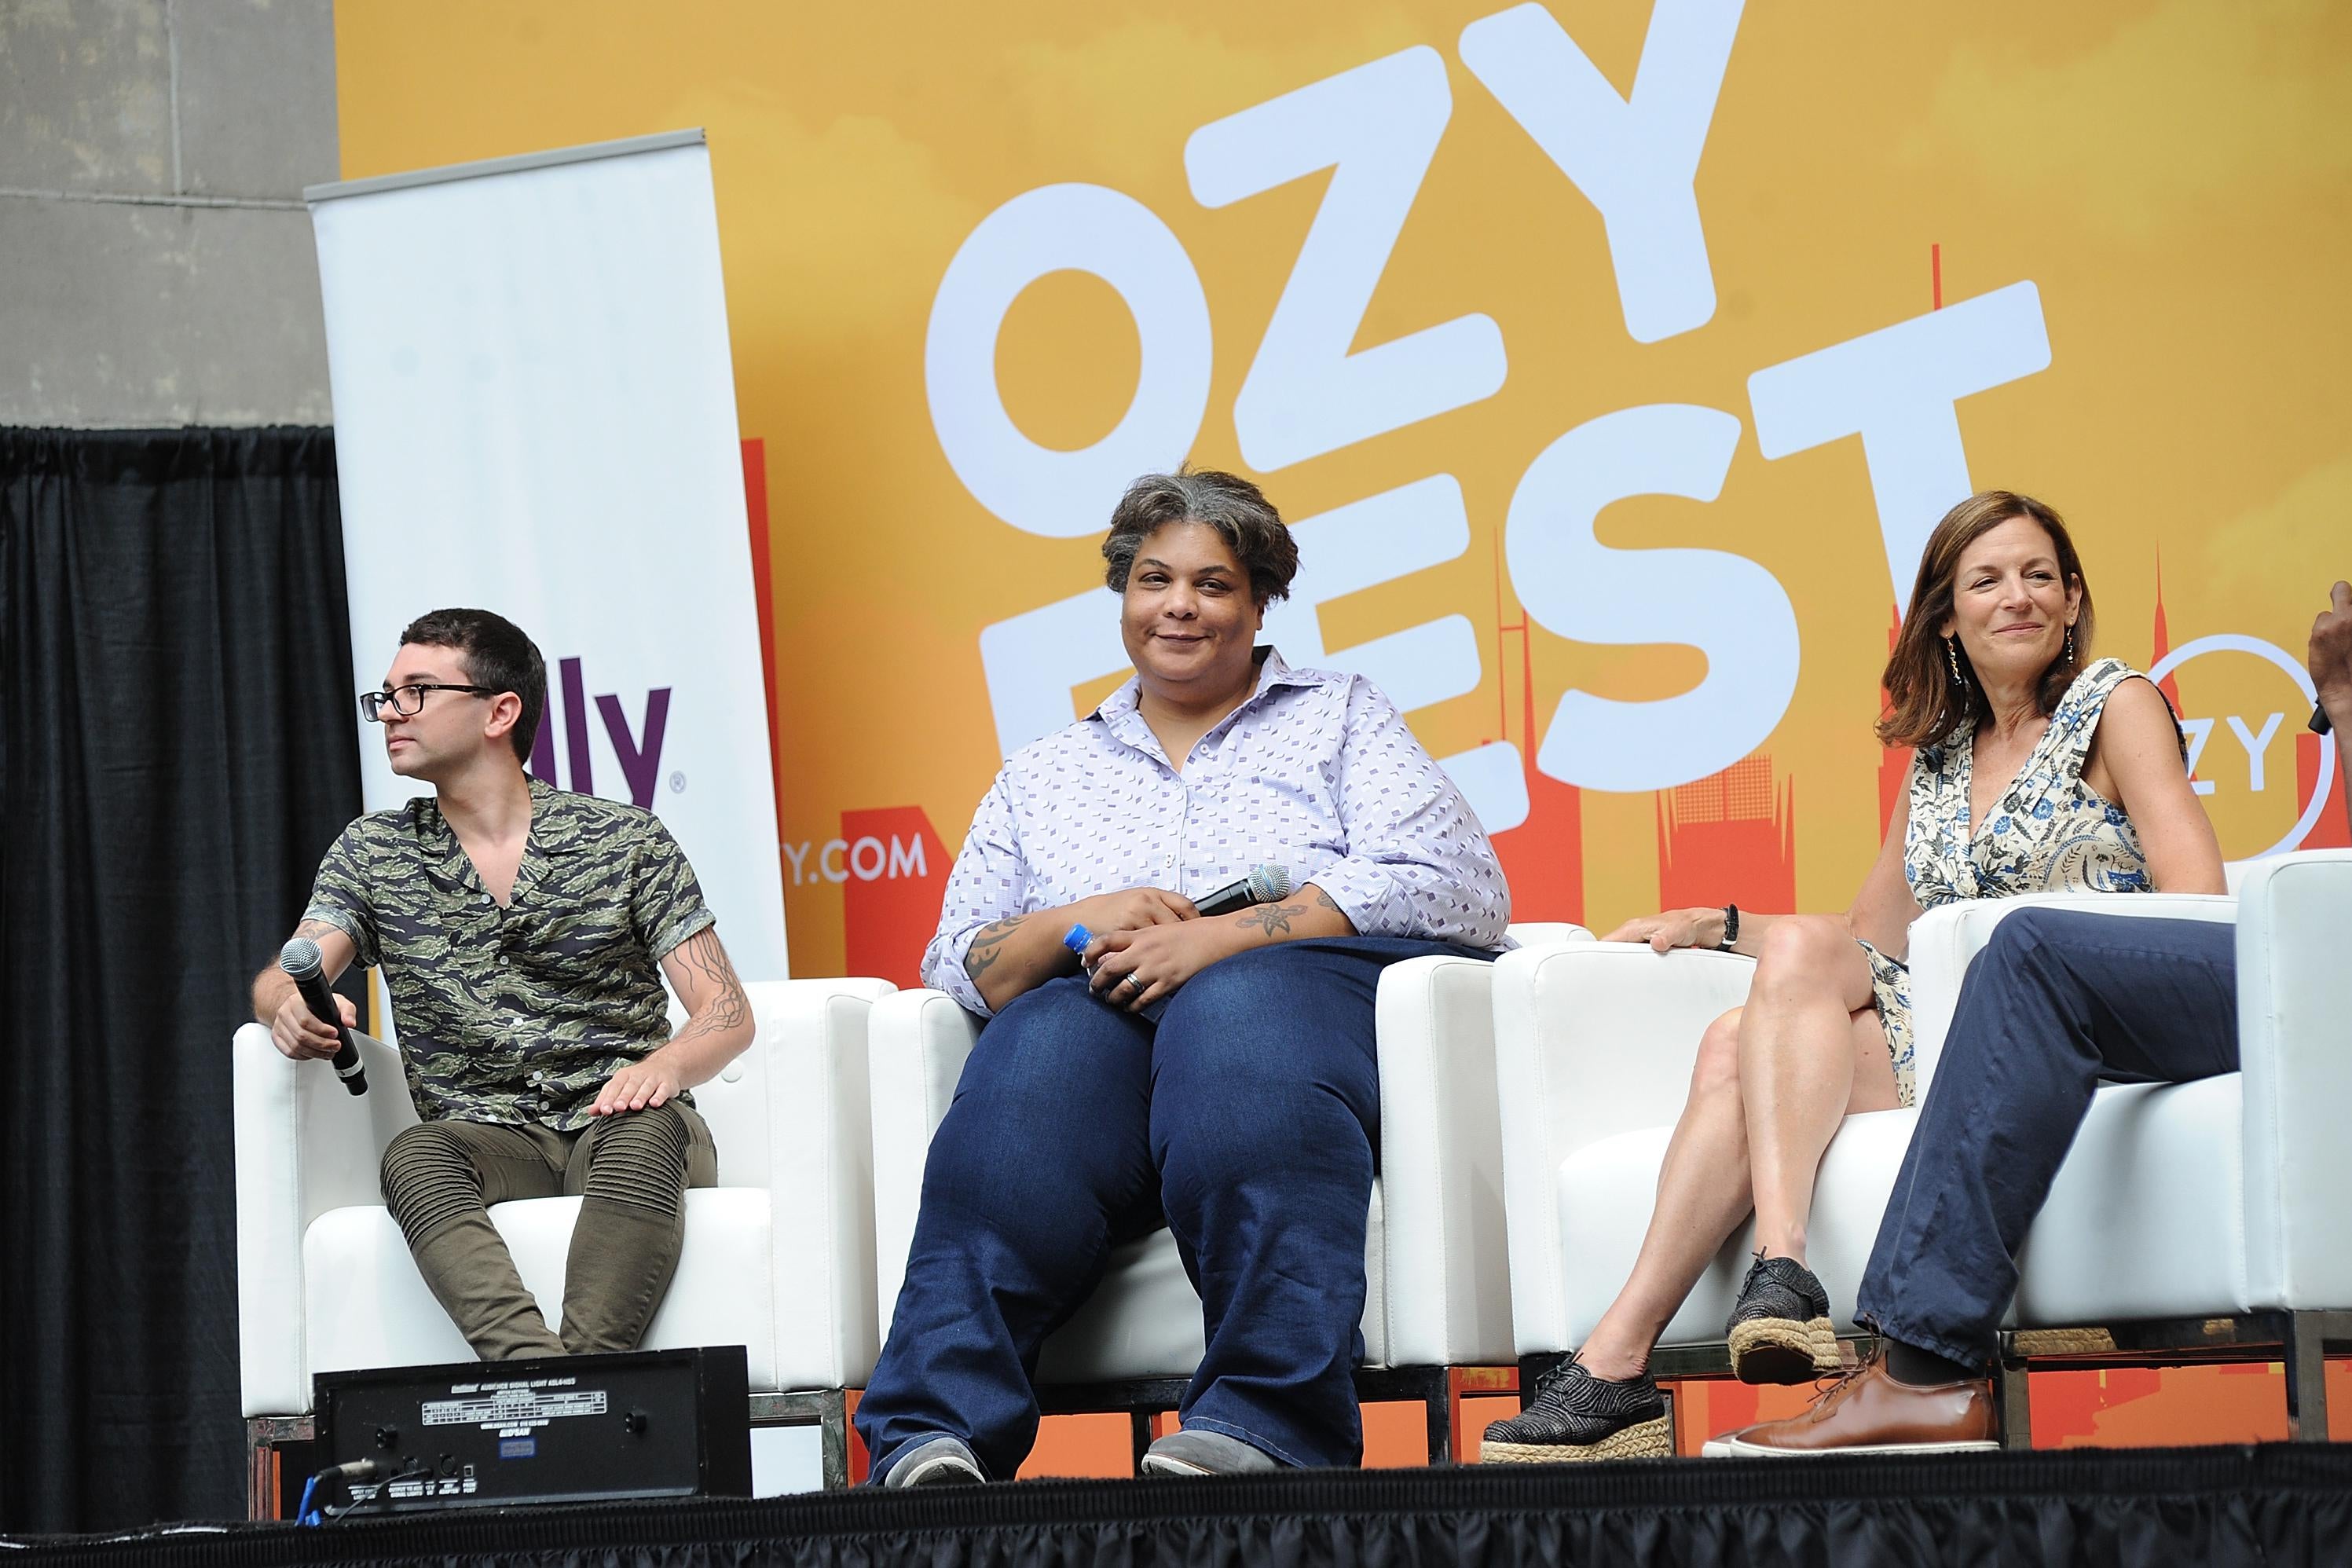 Roxane Gay sits onstage with Christian Siriano.